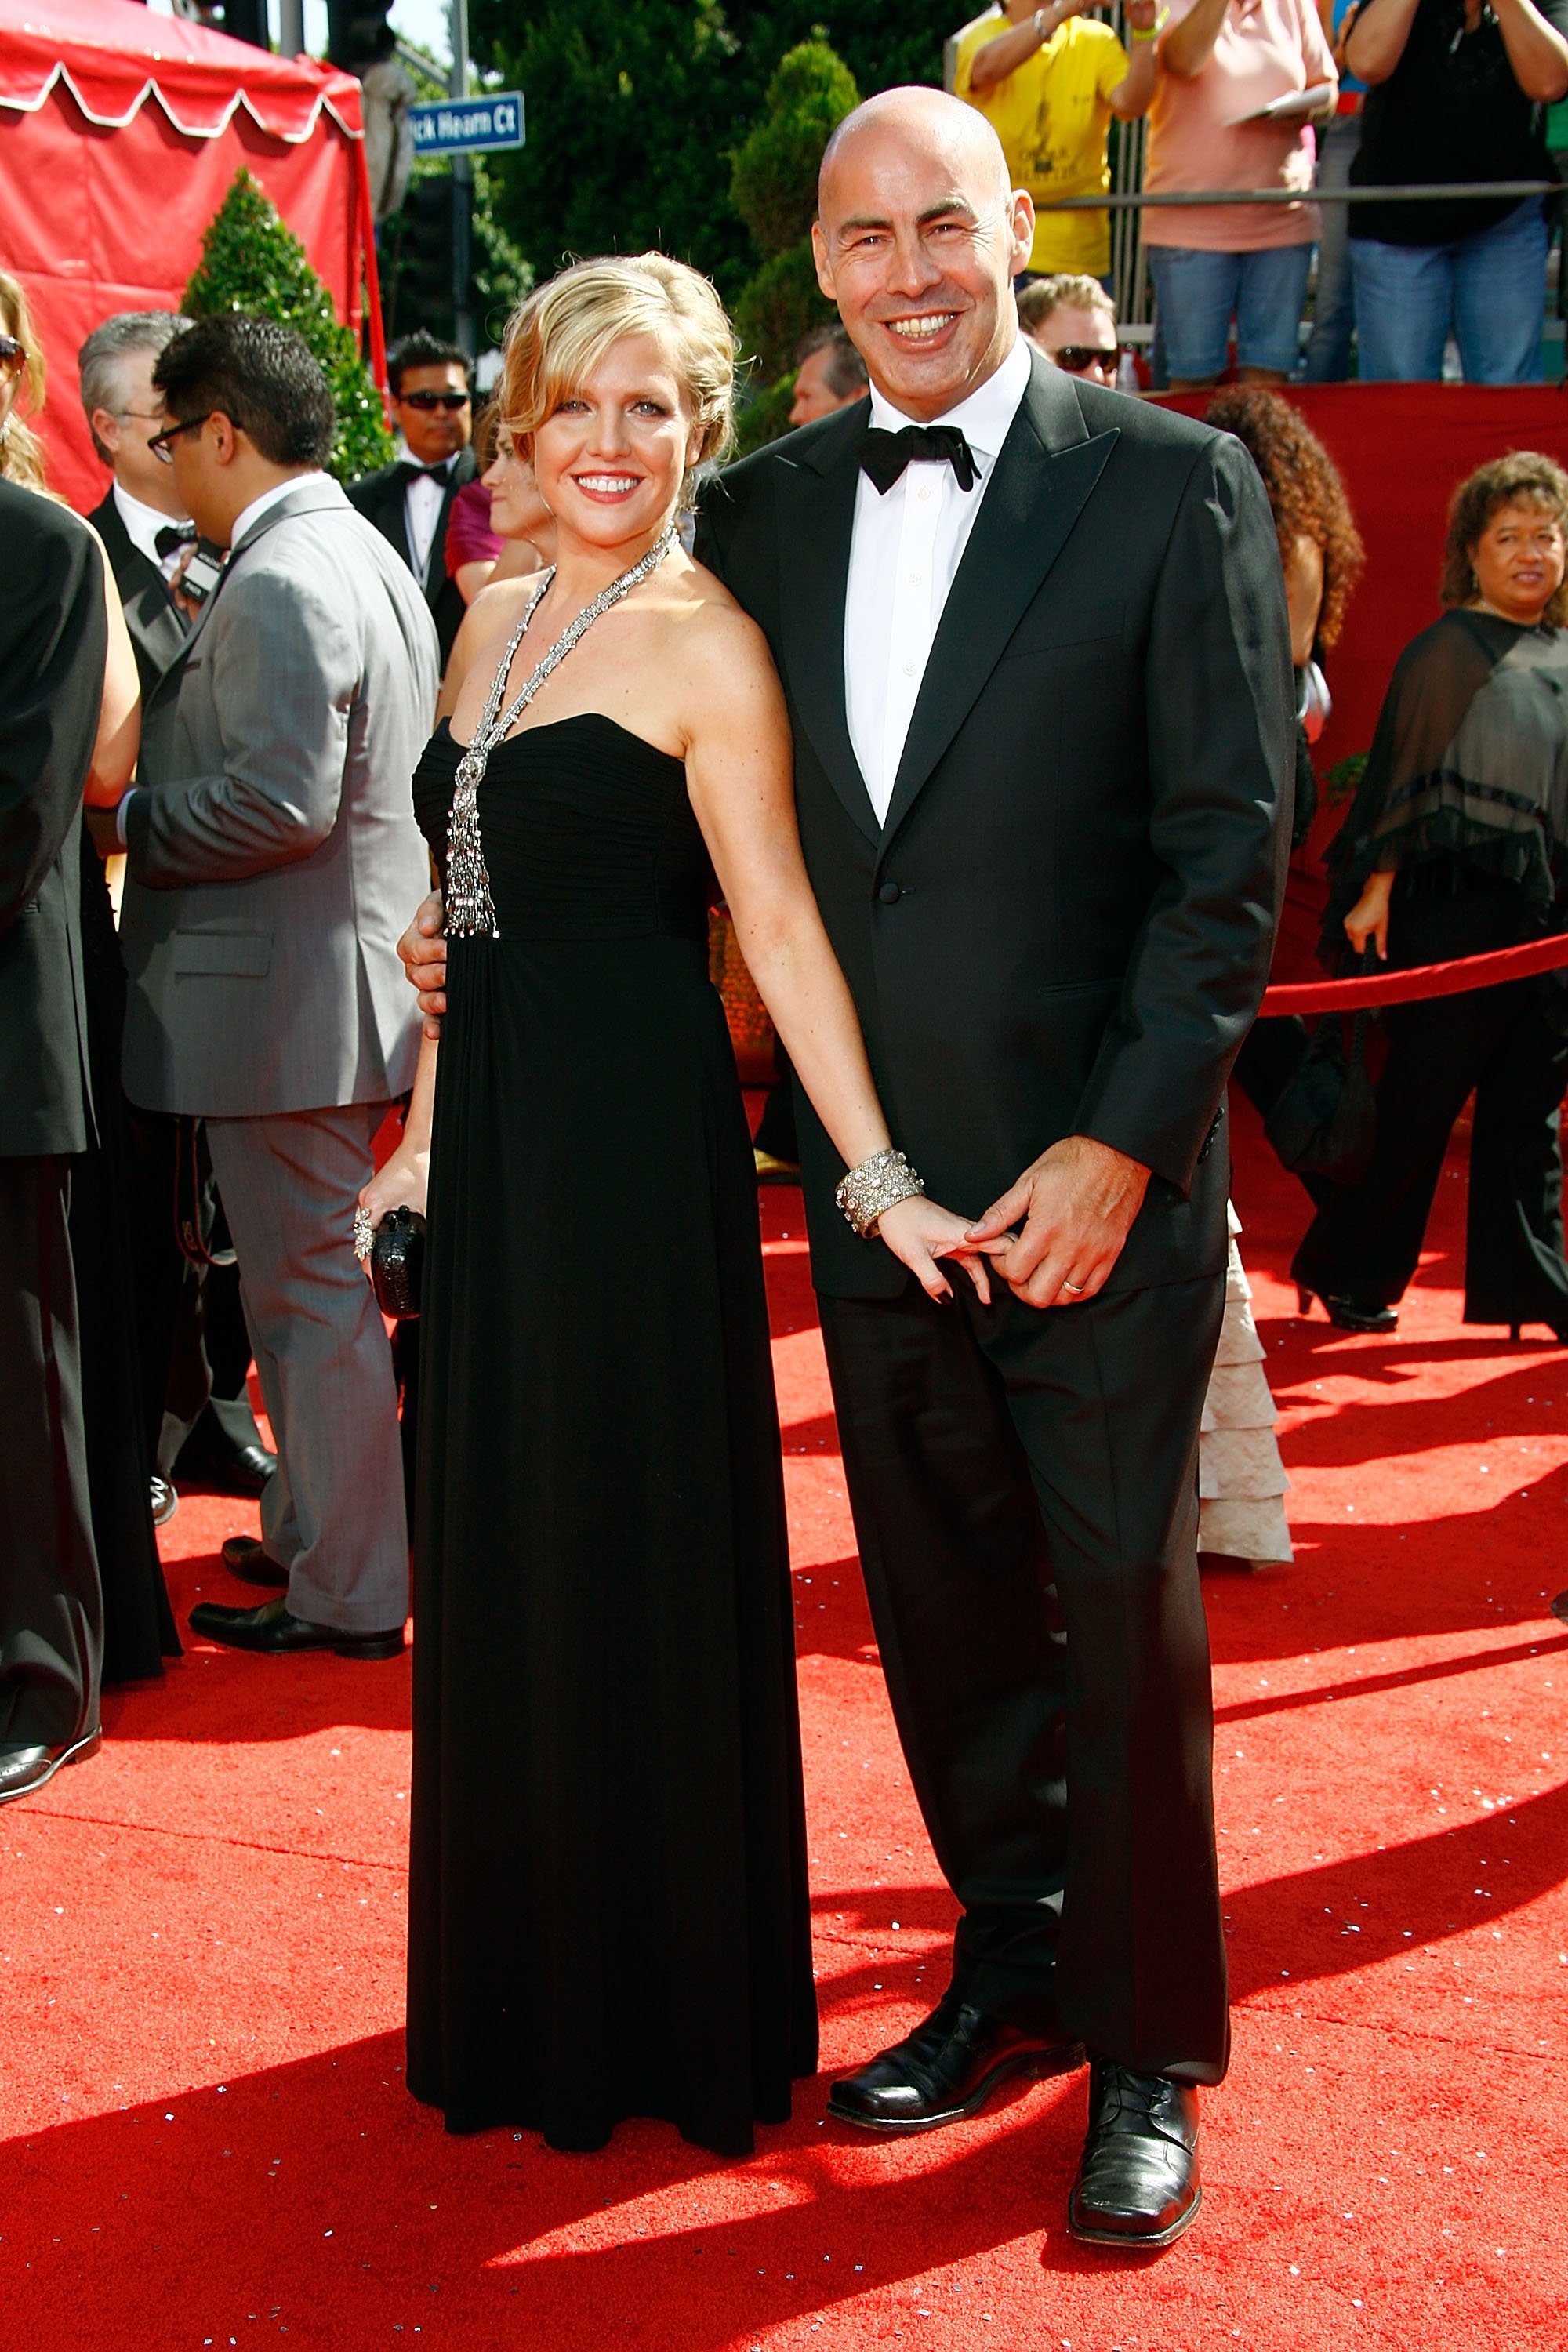 Ashley Jensen and husband Terence Beesley arrive at the 60th Primetime Emmy Awards, 2008, Los Angeles, California. | Photo: Getty Images